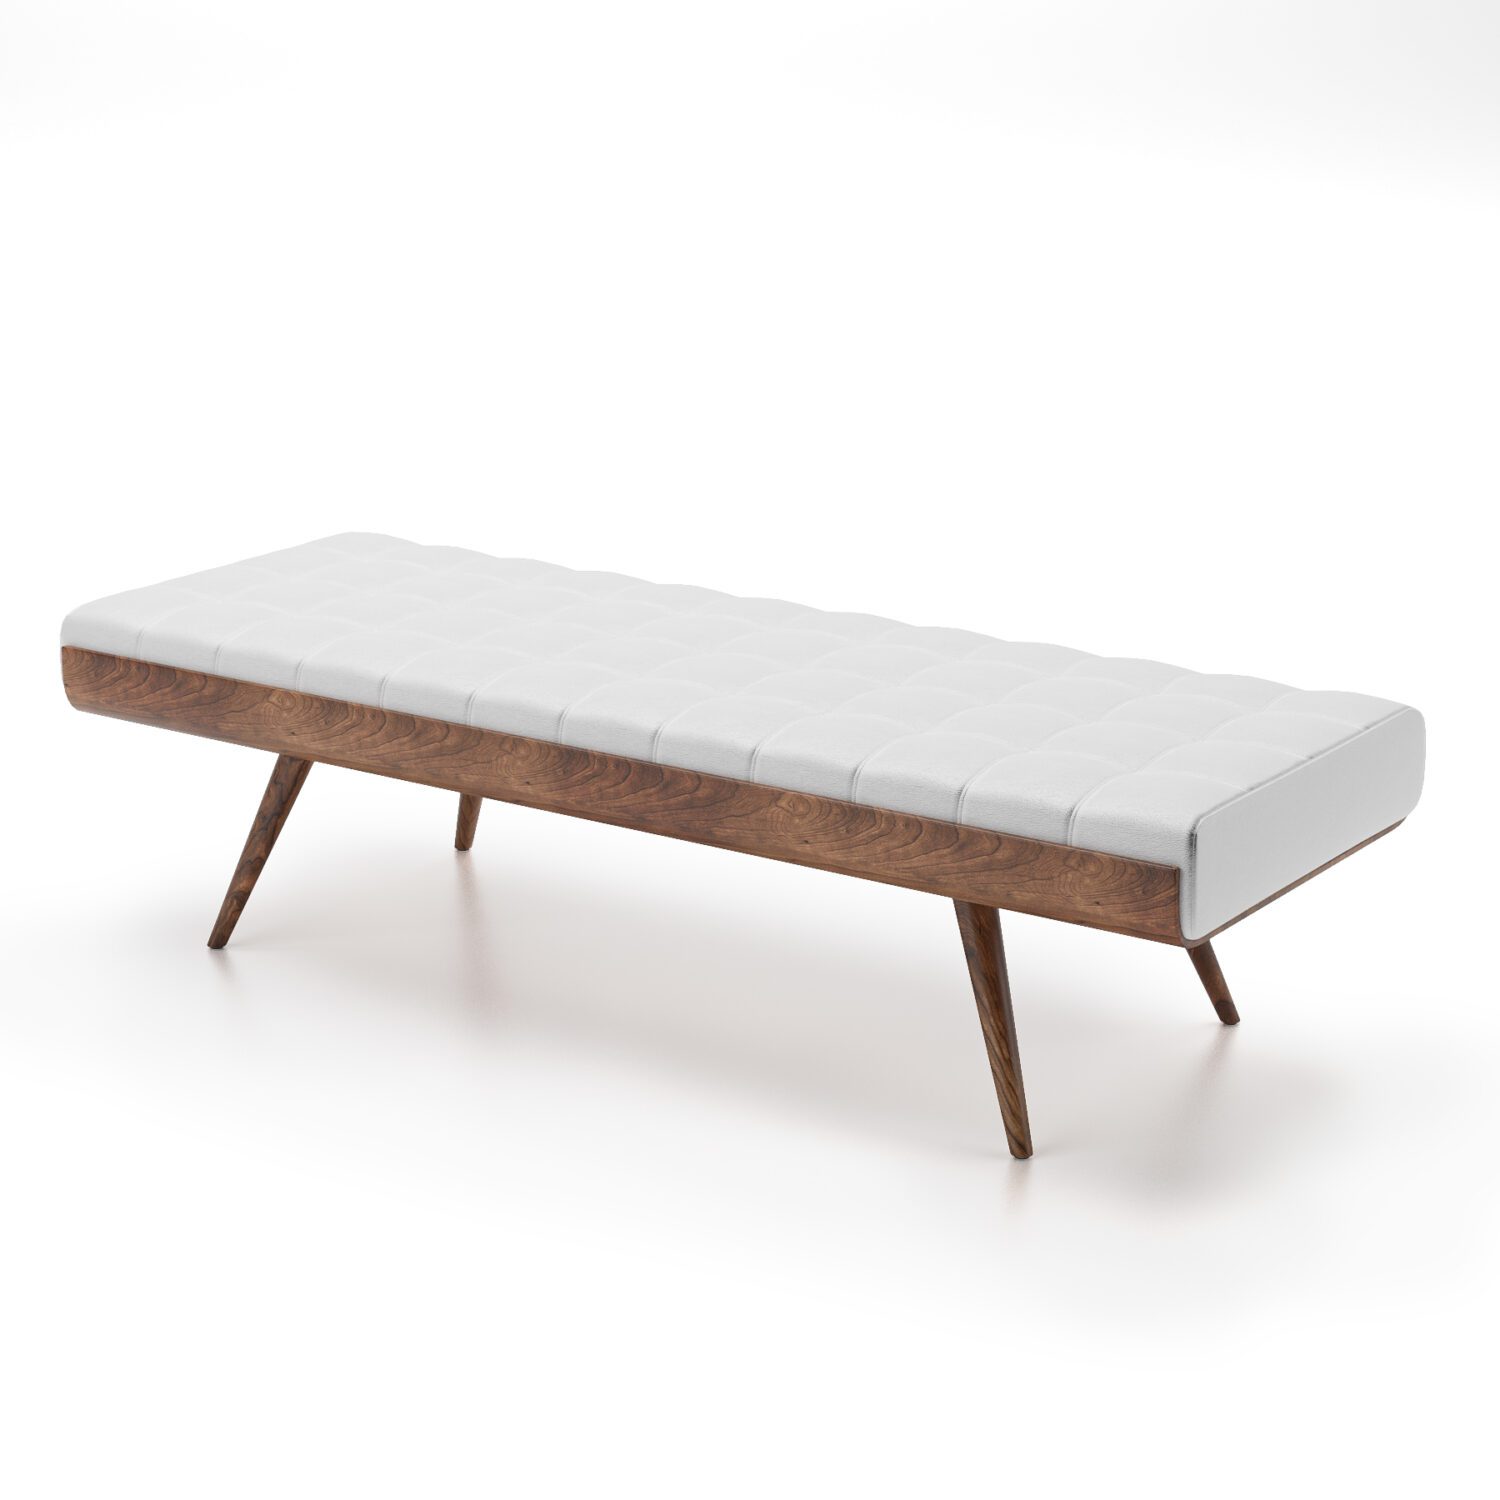 11144. Download Free 3D Bench Model by Giang Hoang